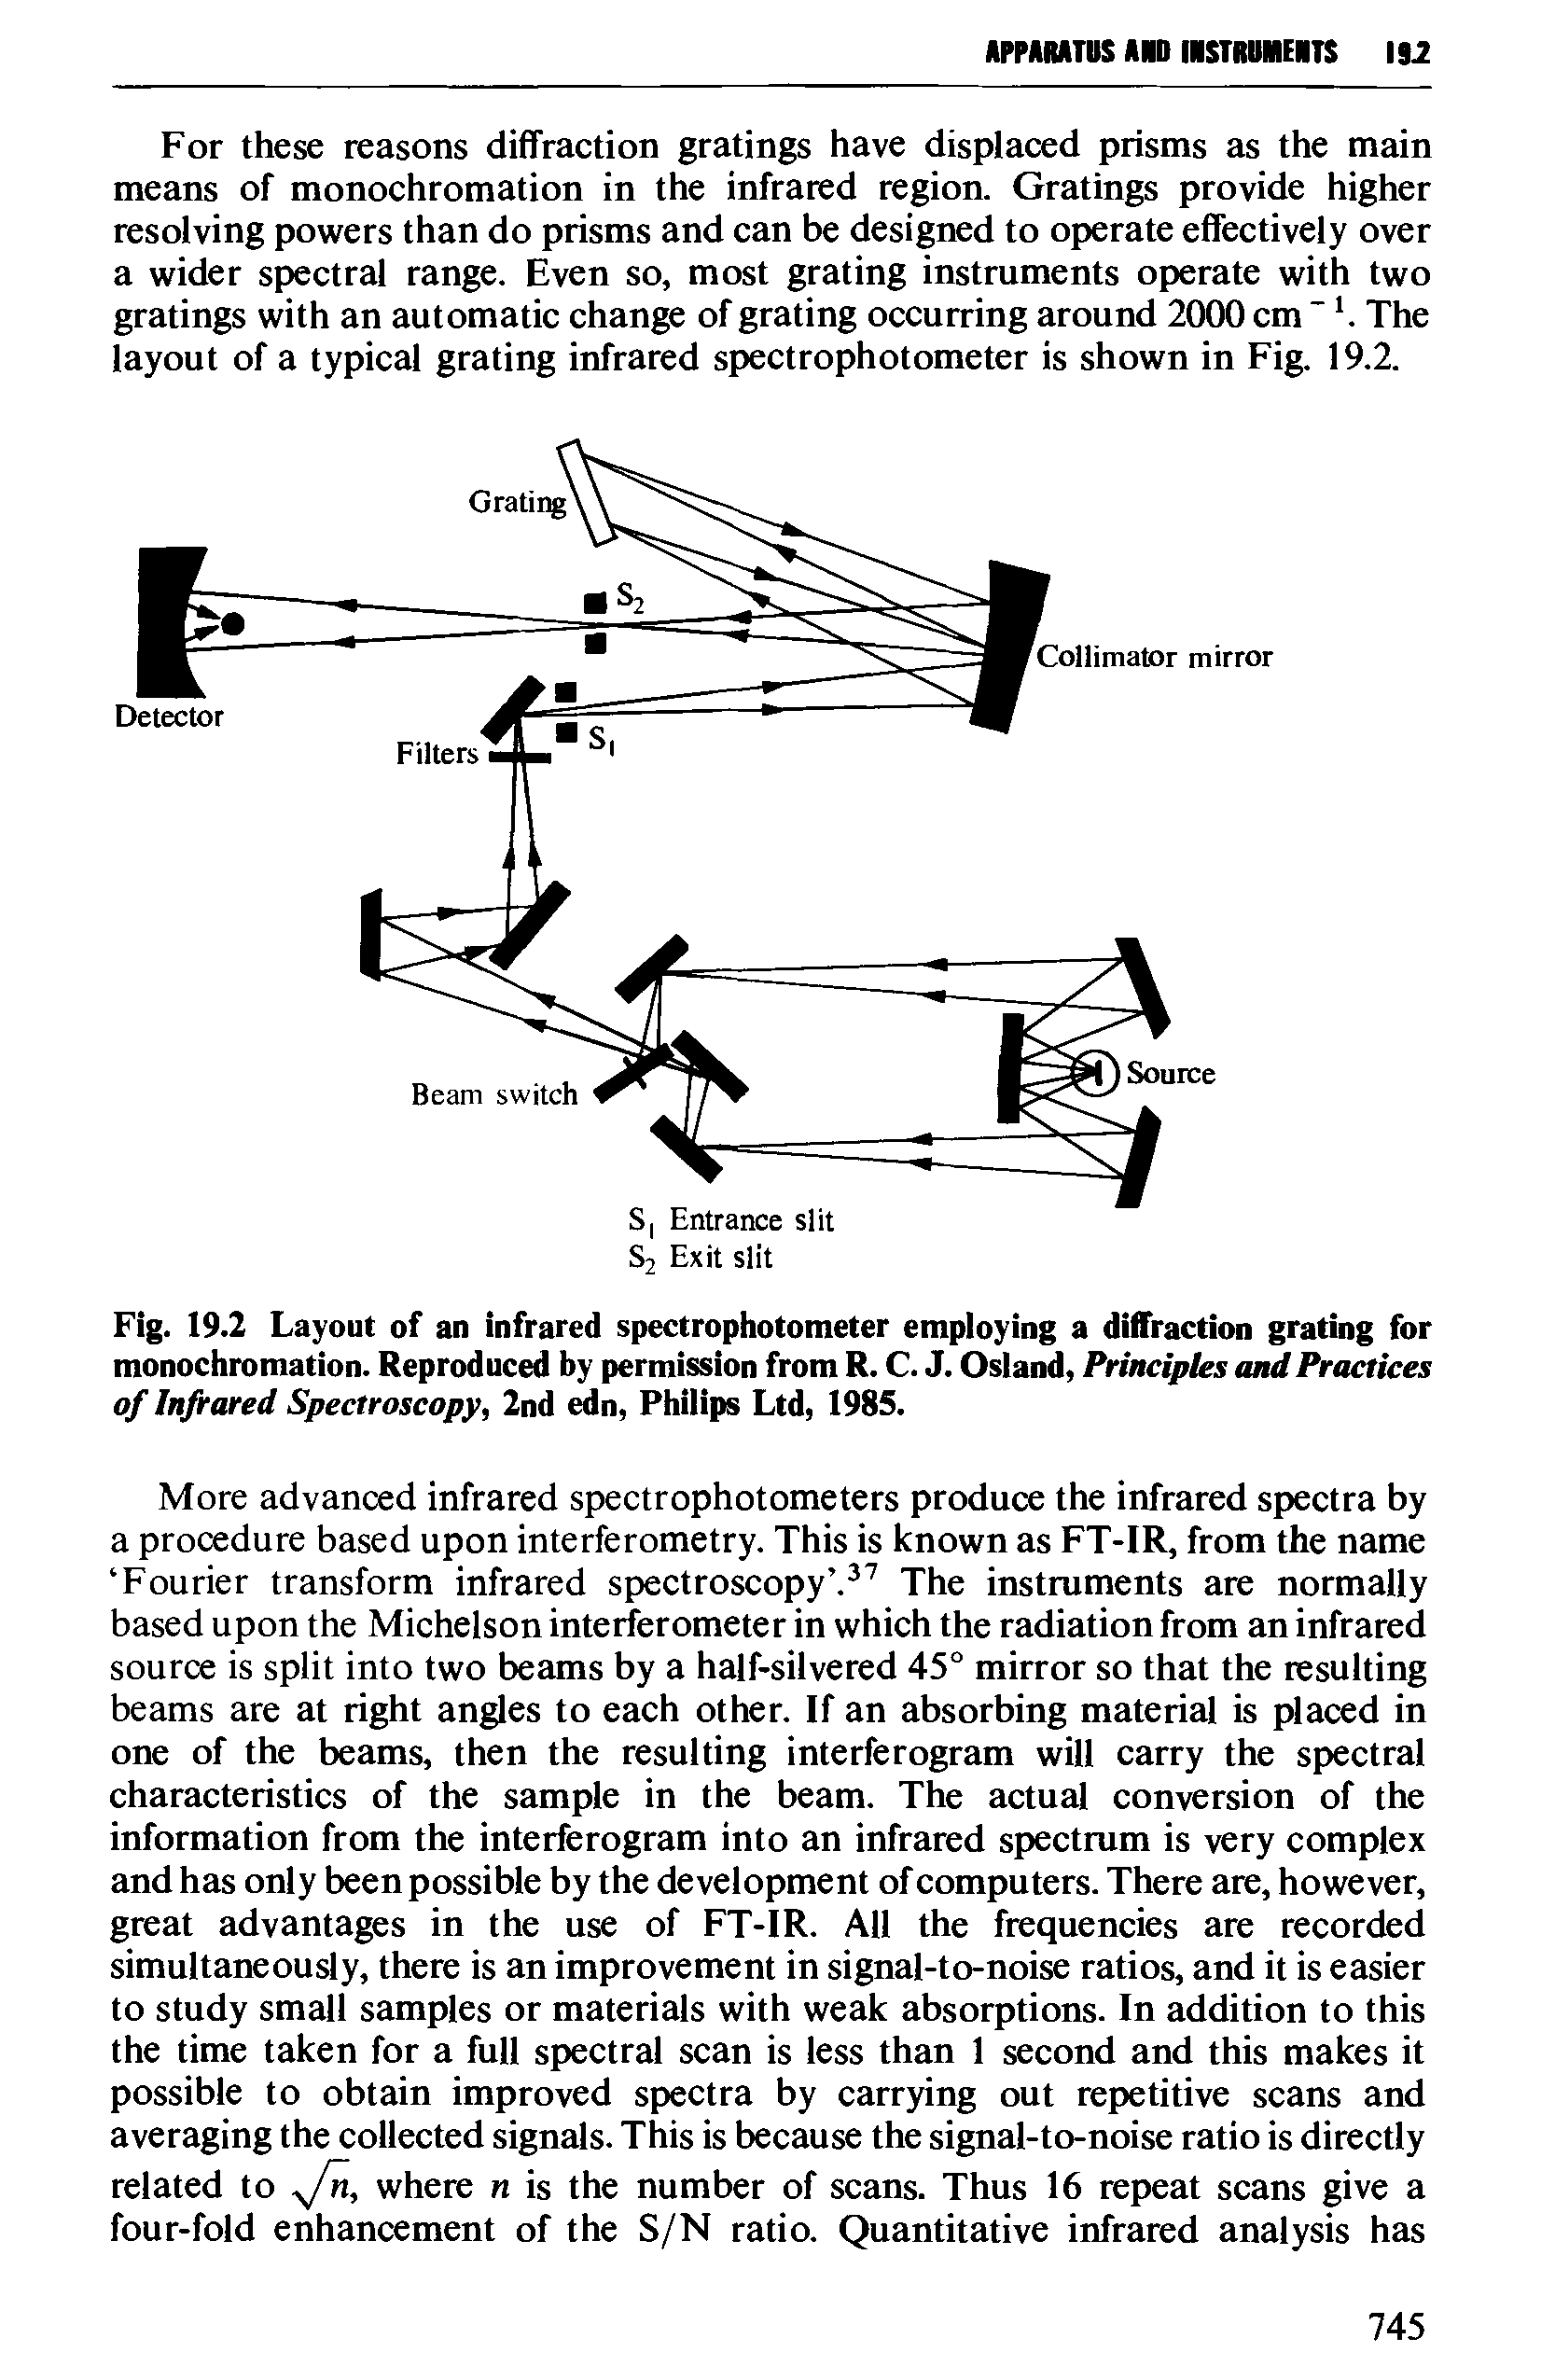 Fig. 19.2 Layout of an infrared spectrophotometer employing a diffraction grating for monochromation. Reproduced by permission from R. C. J. Osland, Principles and Practices of Infrared Spectroscopy, 2nd edn, Philips Ltd, 1985.